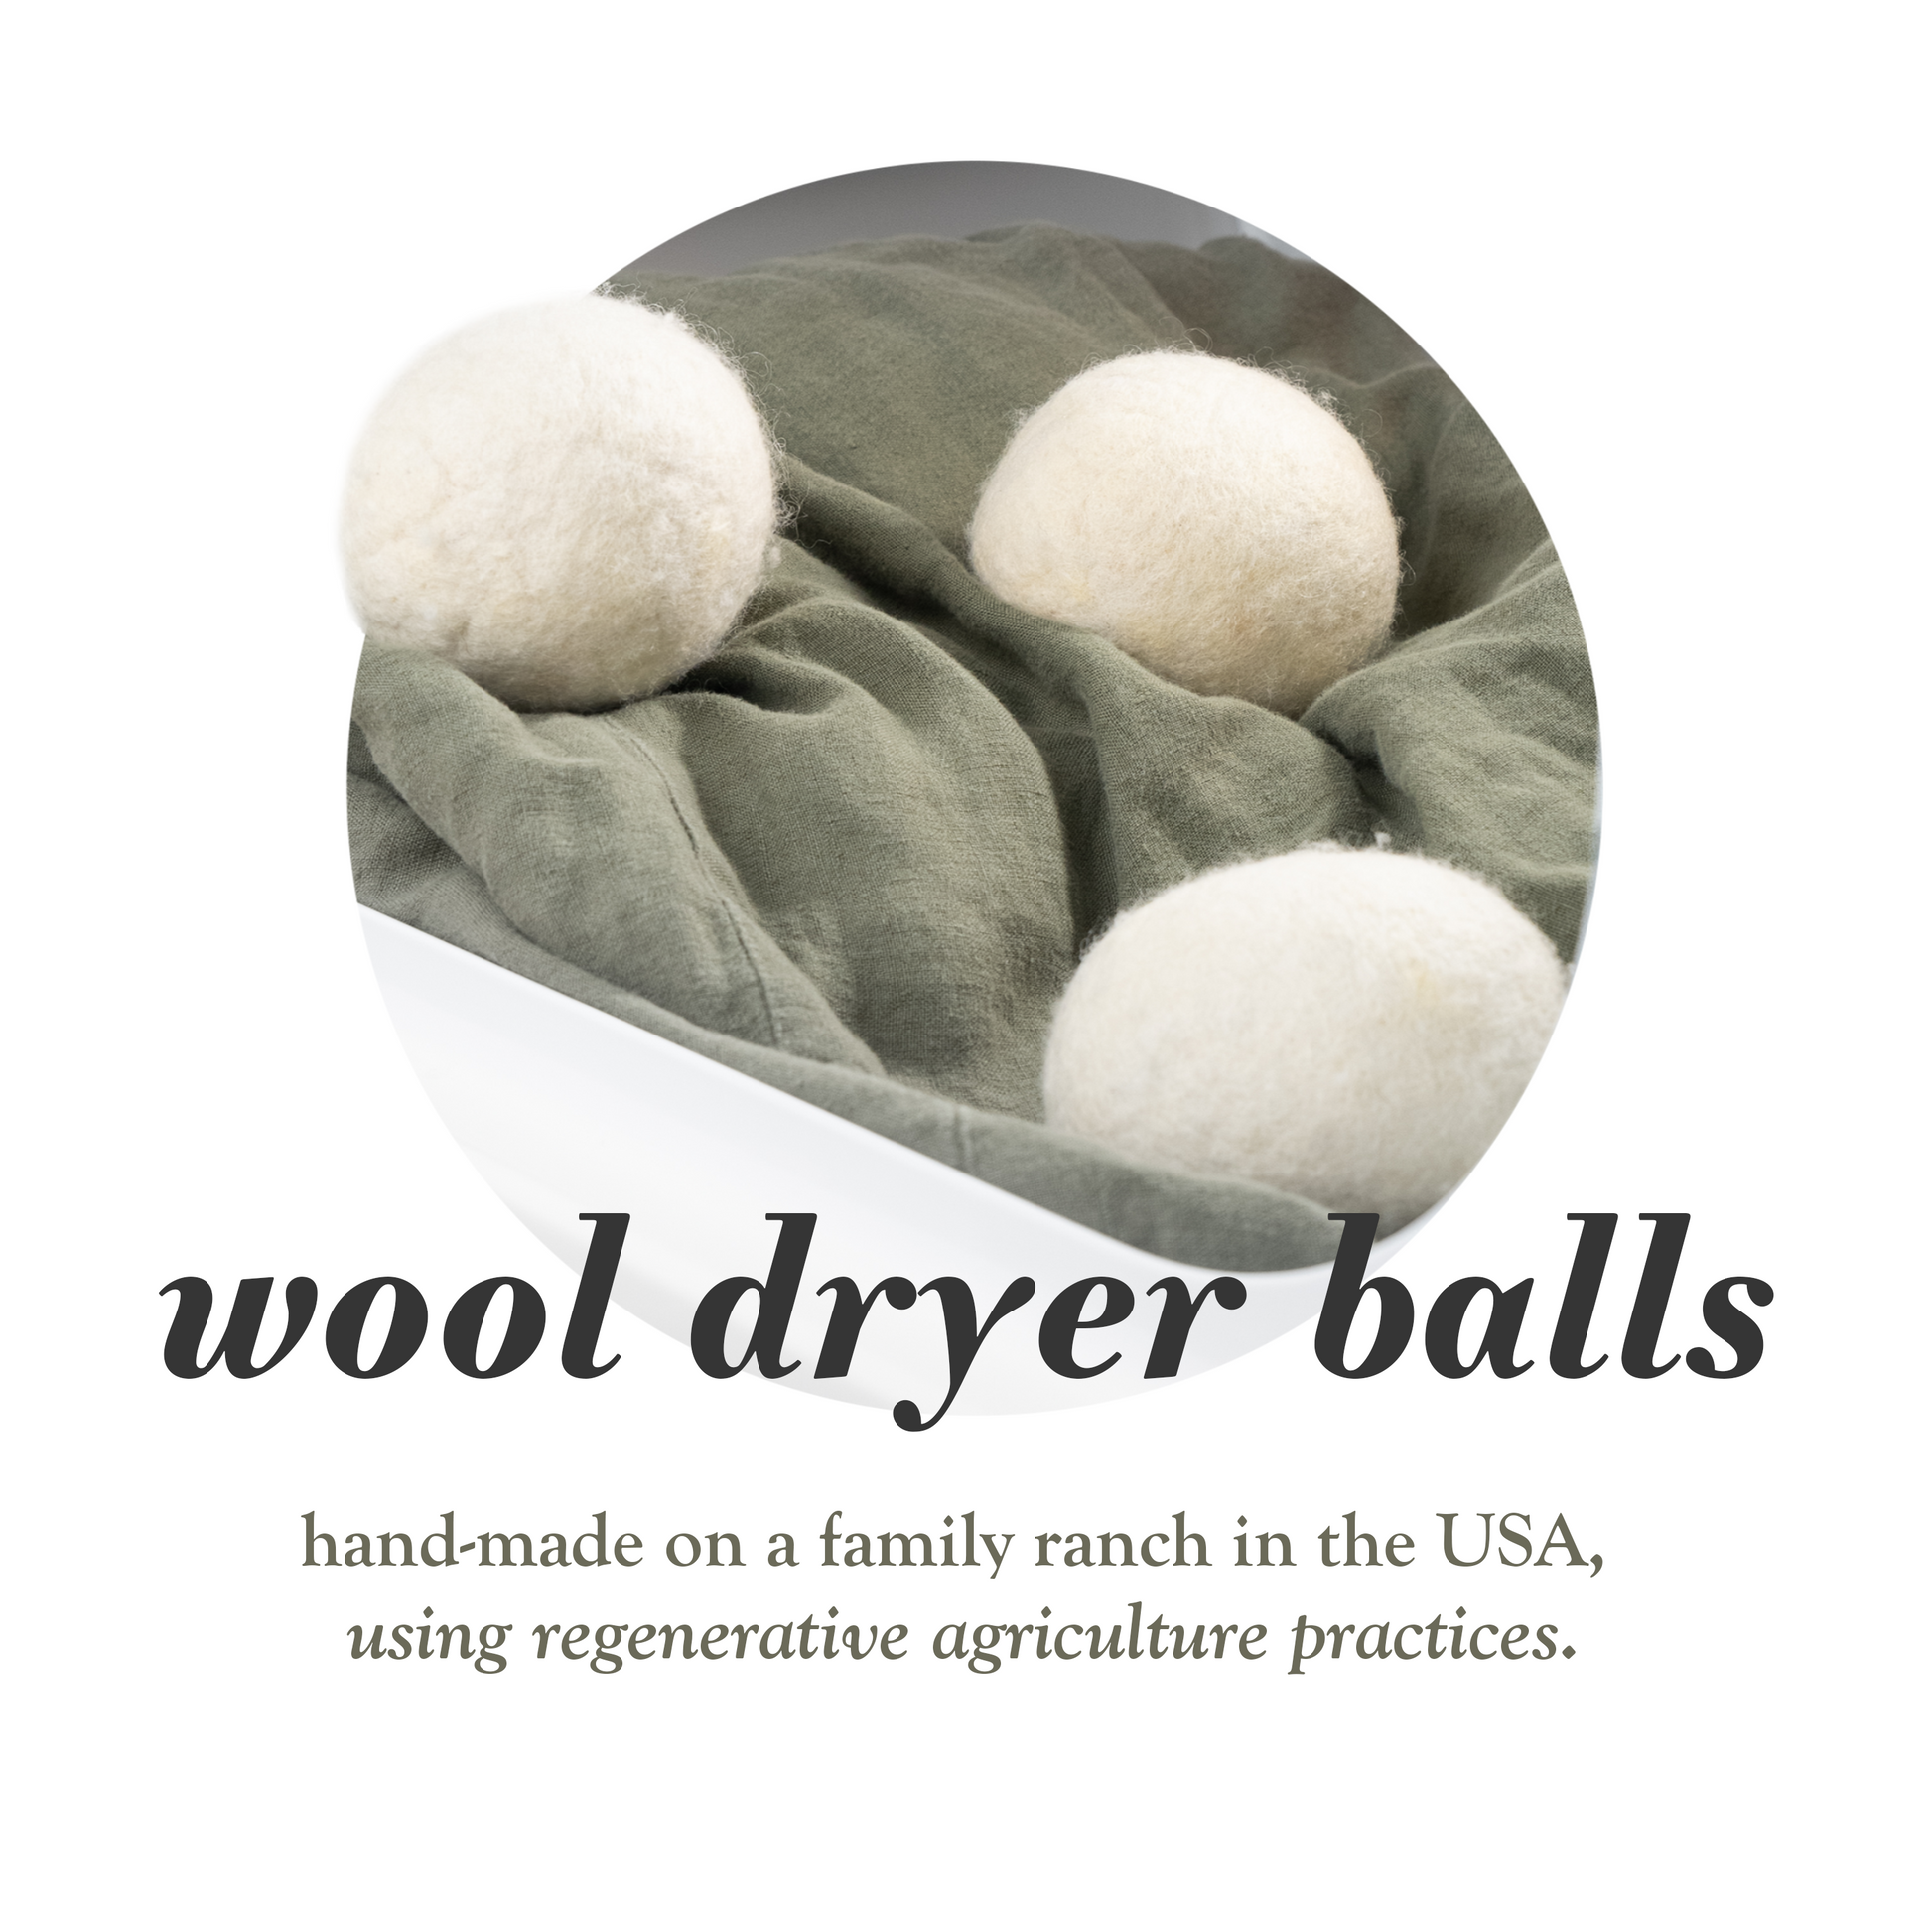 The ultimate guide to using and caring for wool dryer balls 